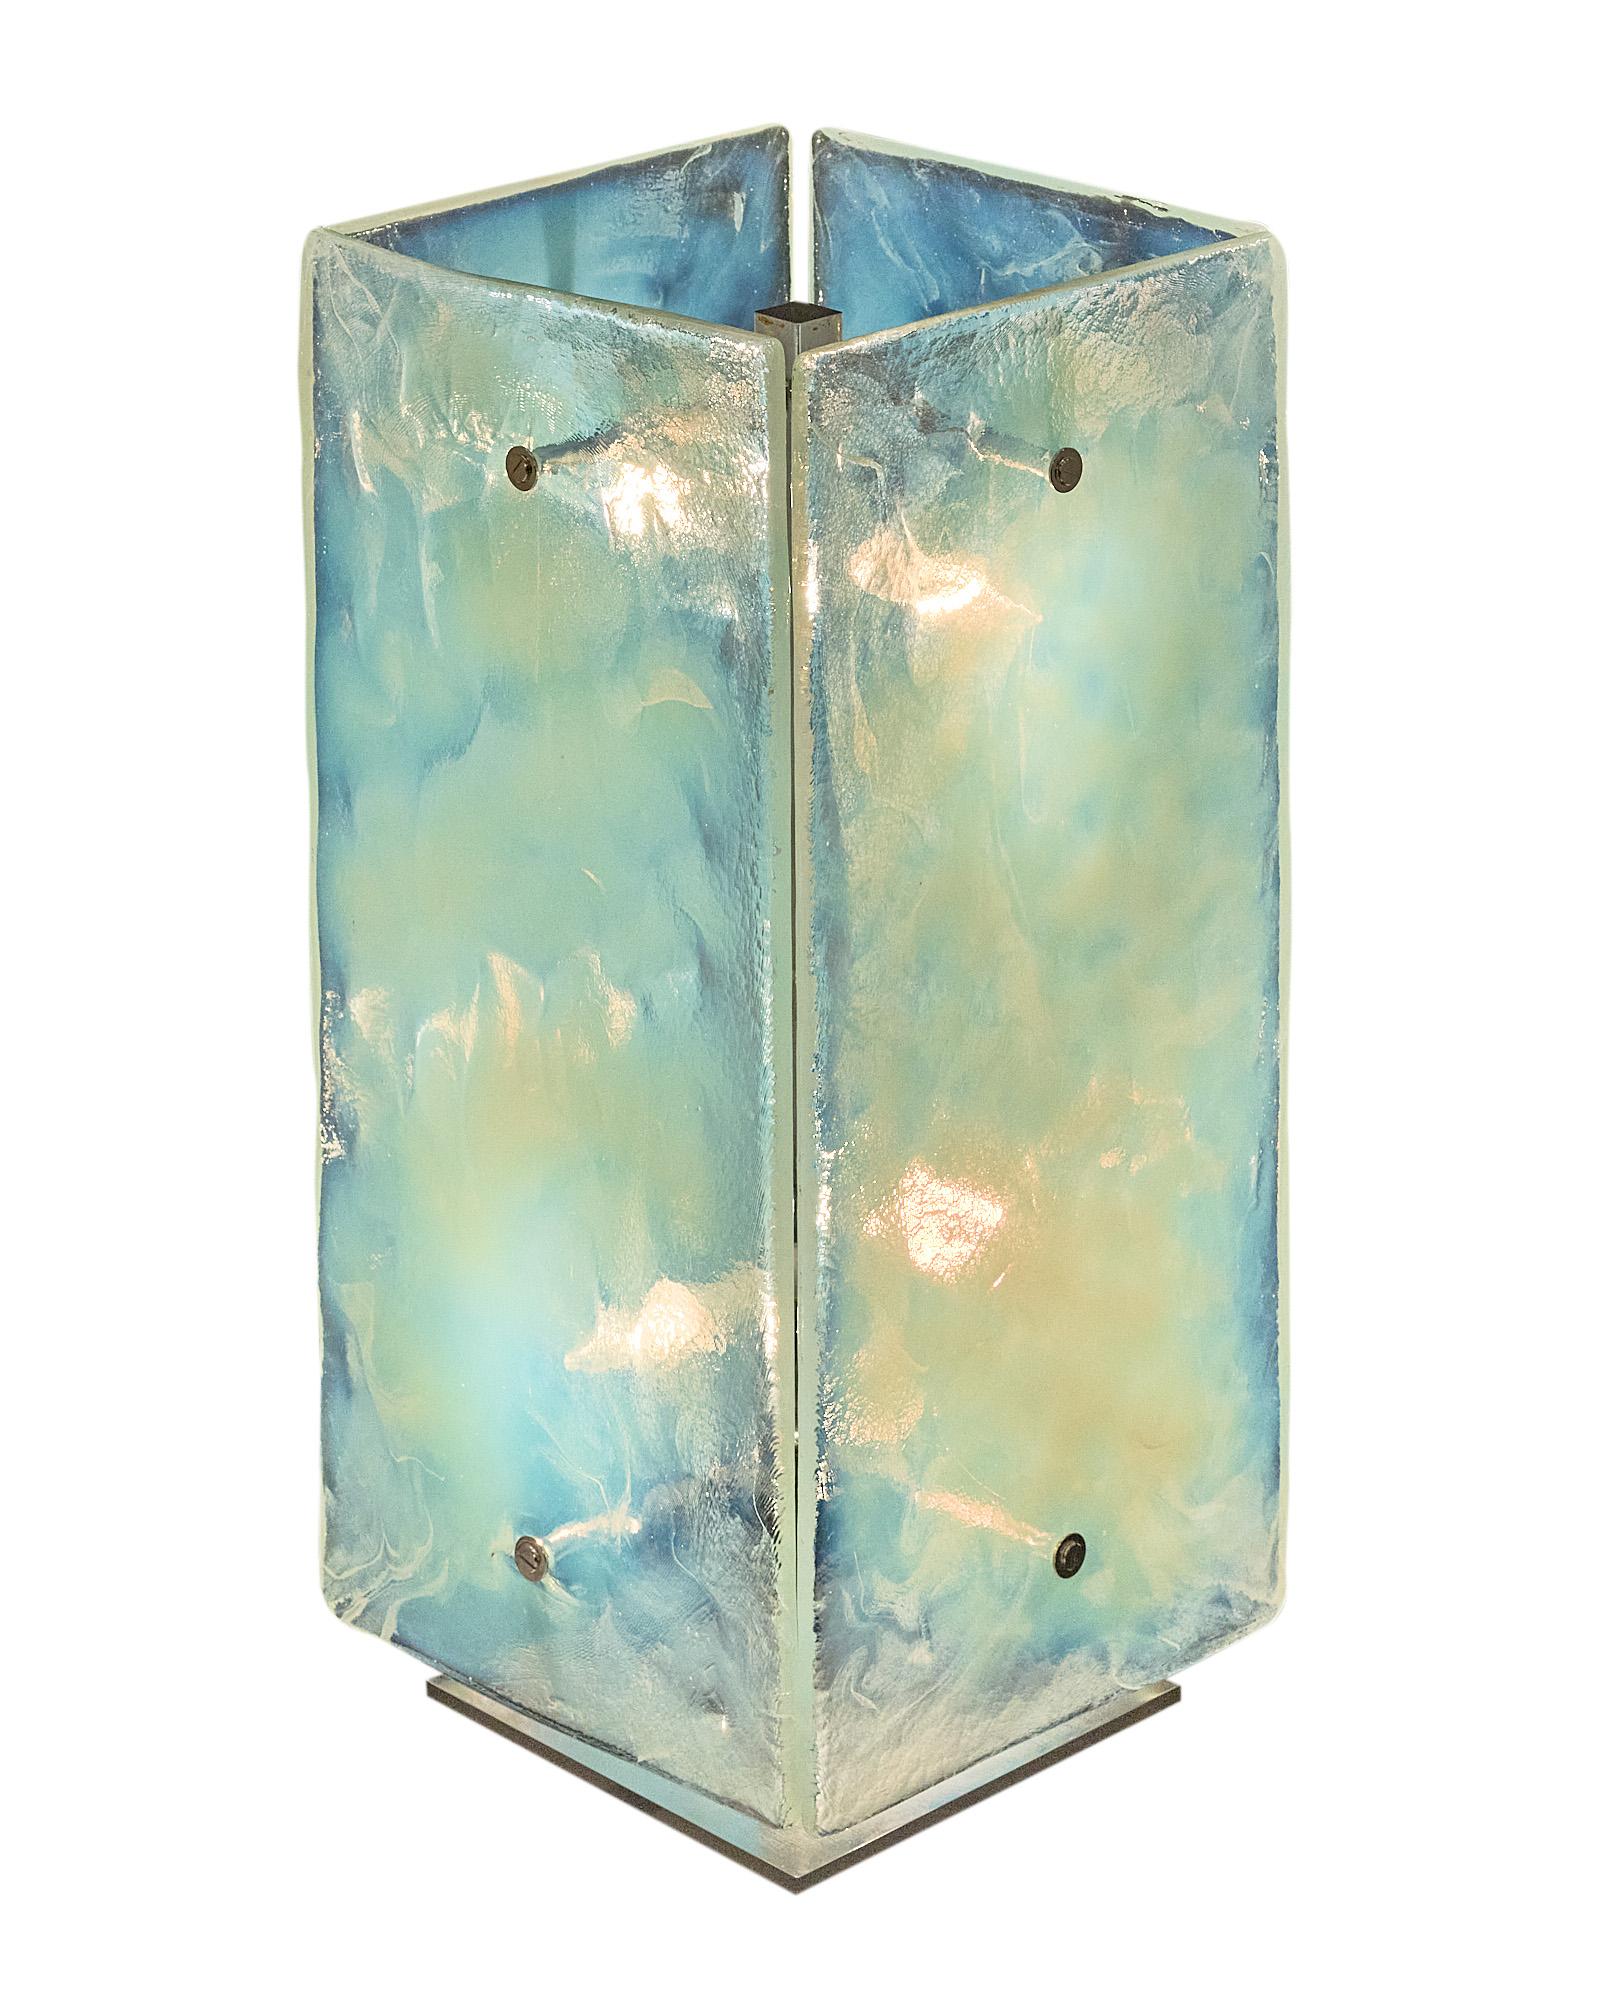 Vintage pair of Murano glass table lamps featuring a striking iridescent finish to the glass panels. Each lamp has four iridescent hand-blown glass panes affixed to a chrome finished structure. This pair creates an ethereal effect as the light